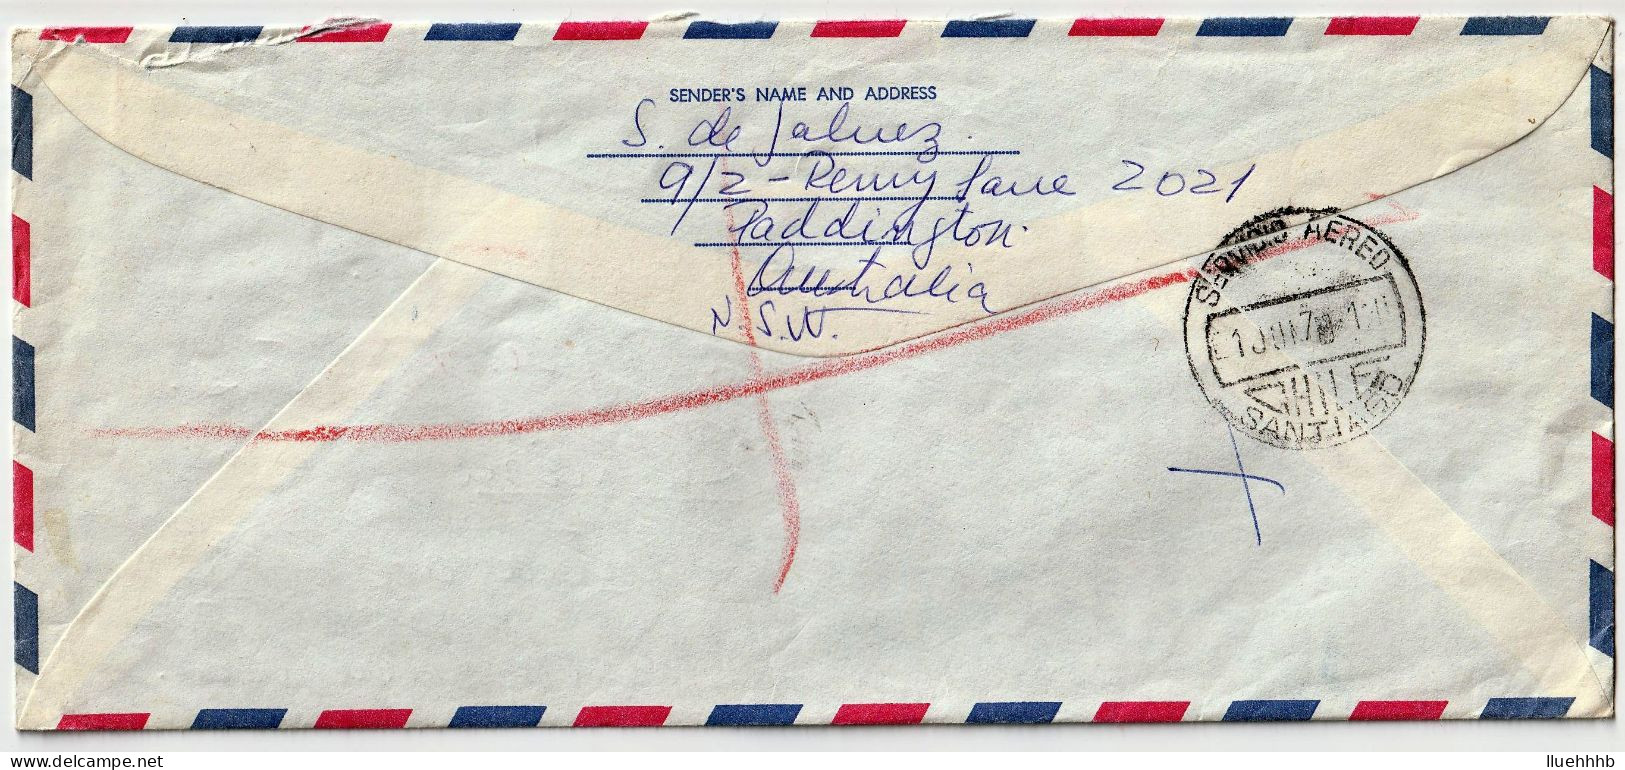 AUSTRALIA: 1974 Registered Airmail Cover To CHILE, $1.05 Rate - Covers & Documents